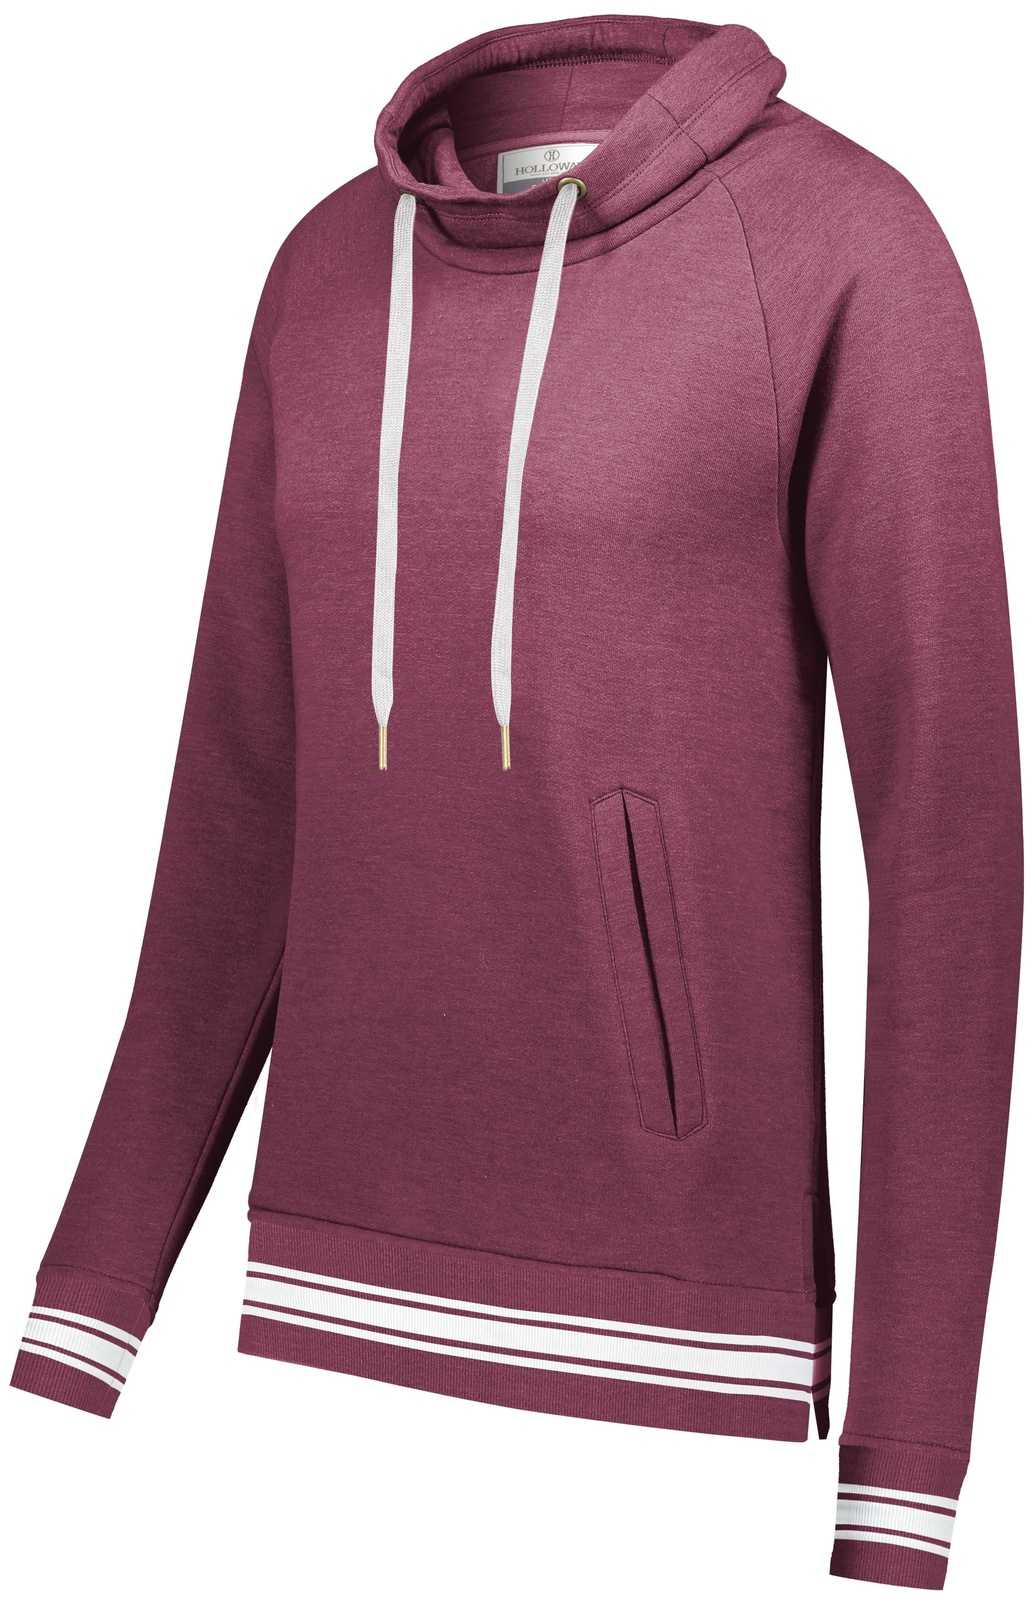 Holloway 229763 Ladies Ivy League Funnel Neck Pullover - Maroon Heather White - HIT a Double